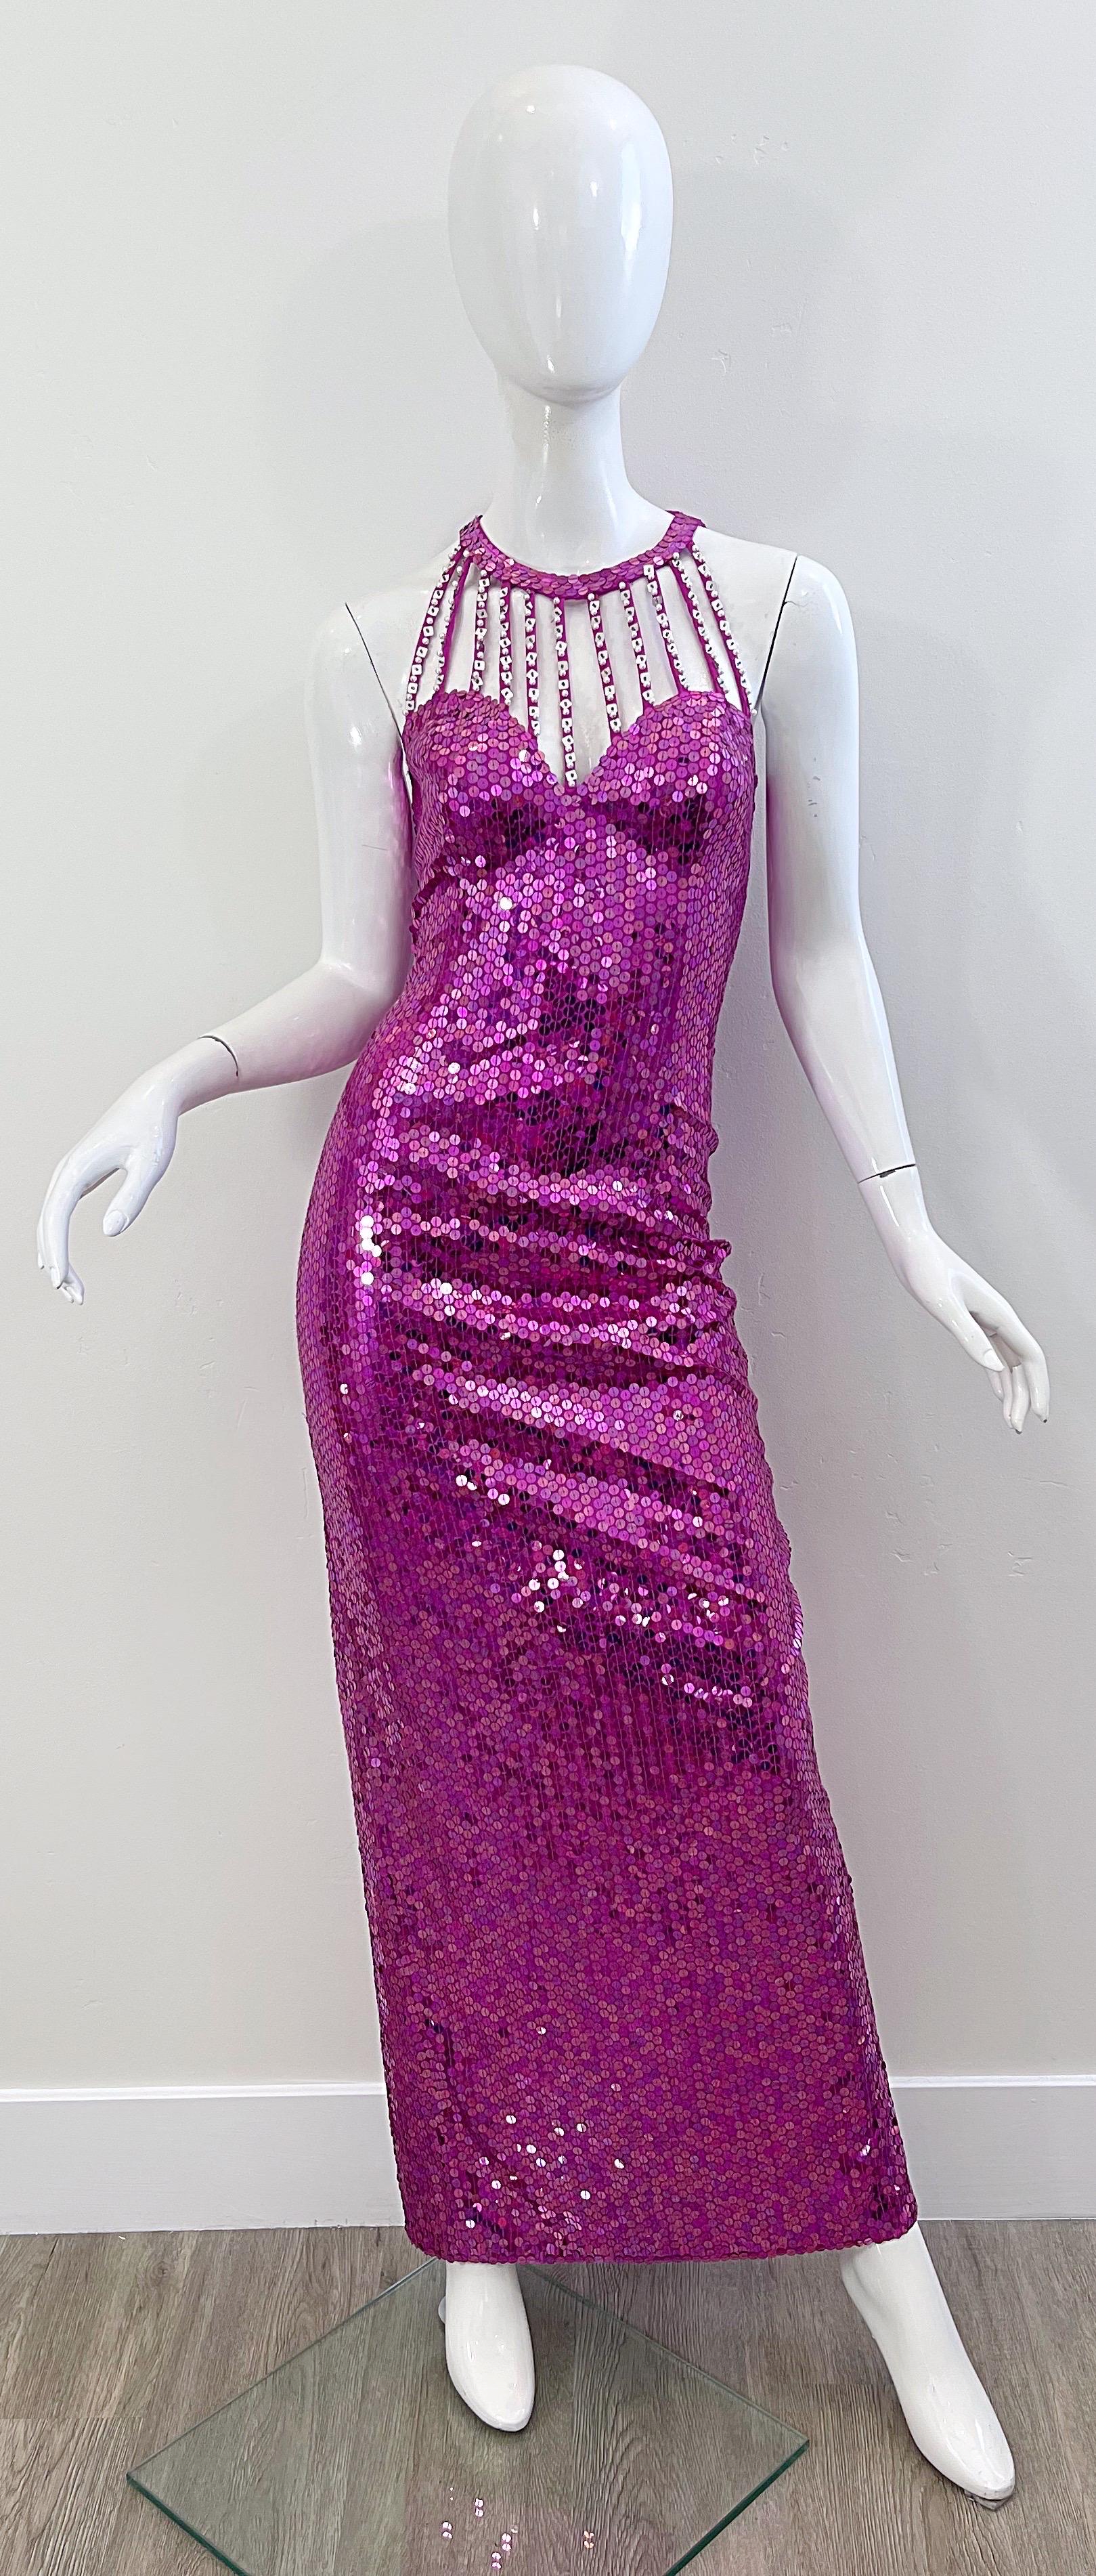 Sexy mid 1980s LILLIE RUBIN hot pink fully sequined evening dress ! Features thousands of hand-sewn sequins. Cage style neck is encrusted with square silver sequins and pearls. Hidden zipper up the back with hook-and-eye closure. Center slit up the